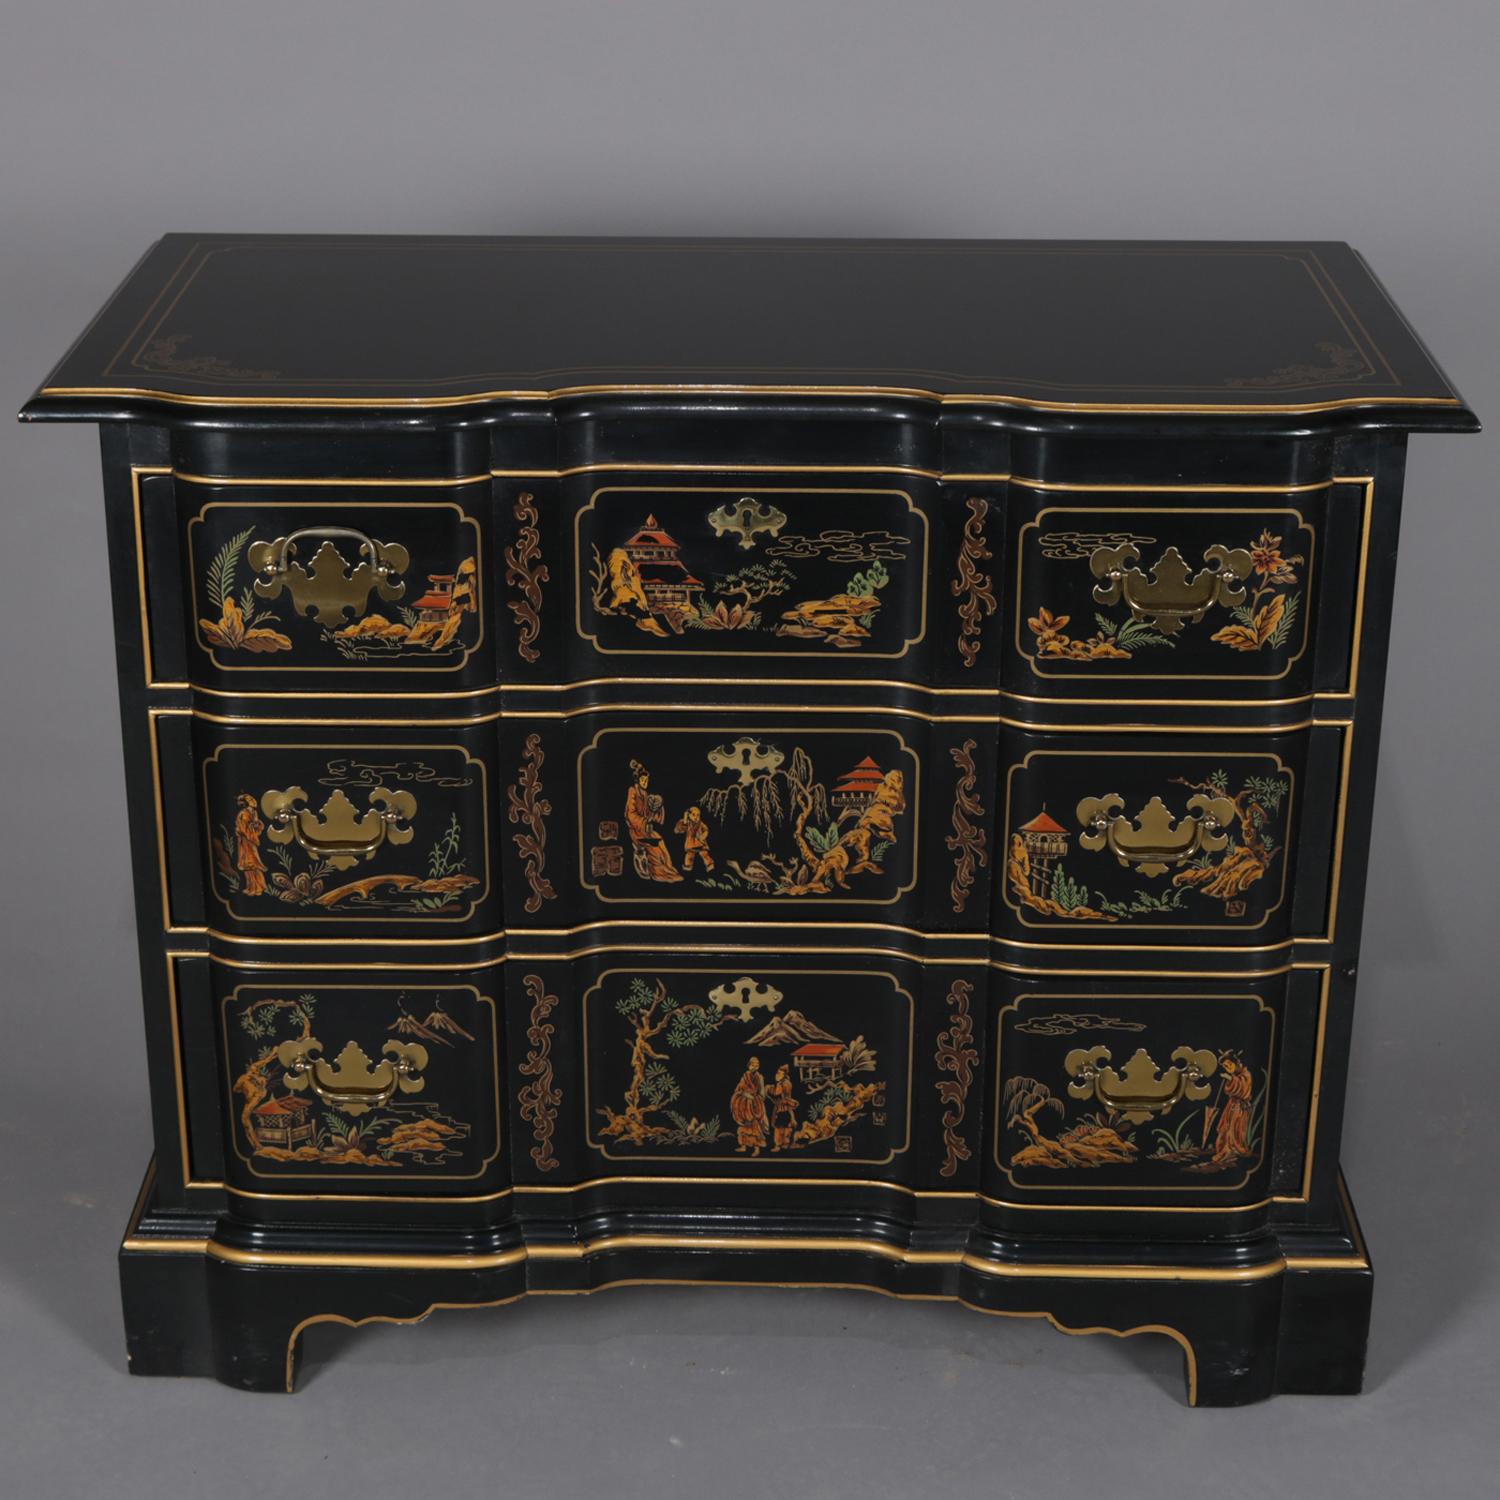 Wood Chinoiserie Gilt Decorated Et Cetera Serpentine 3-Drawer Chest by Drexel